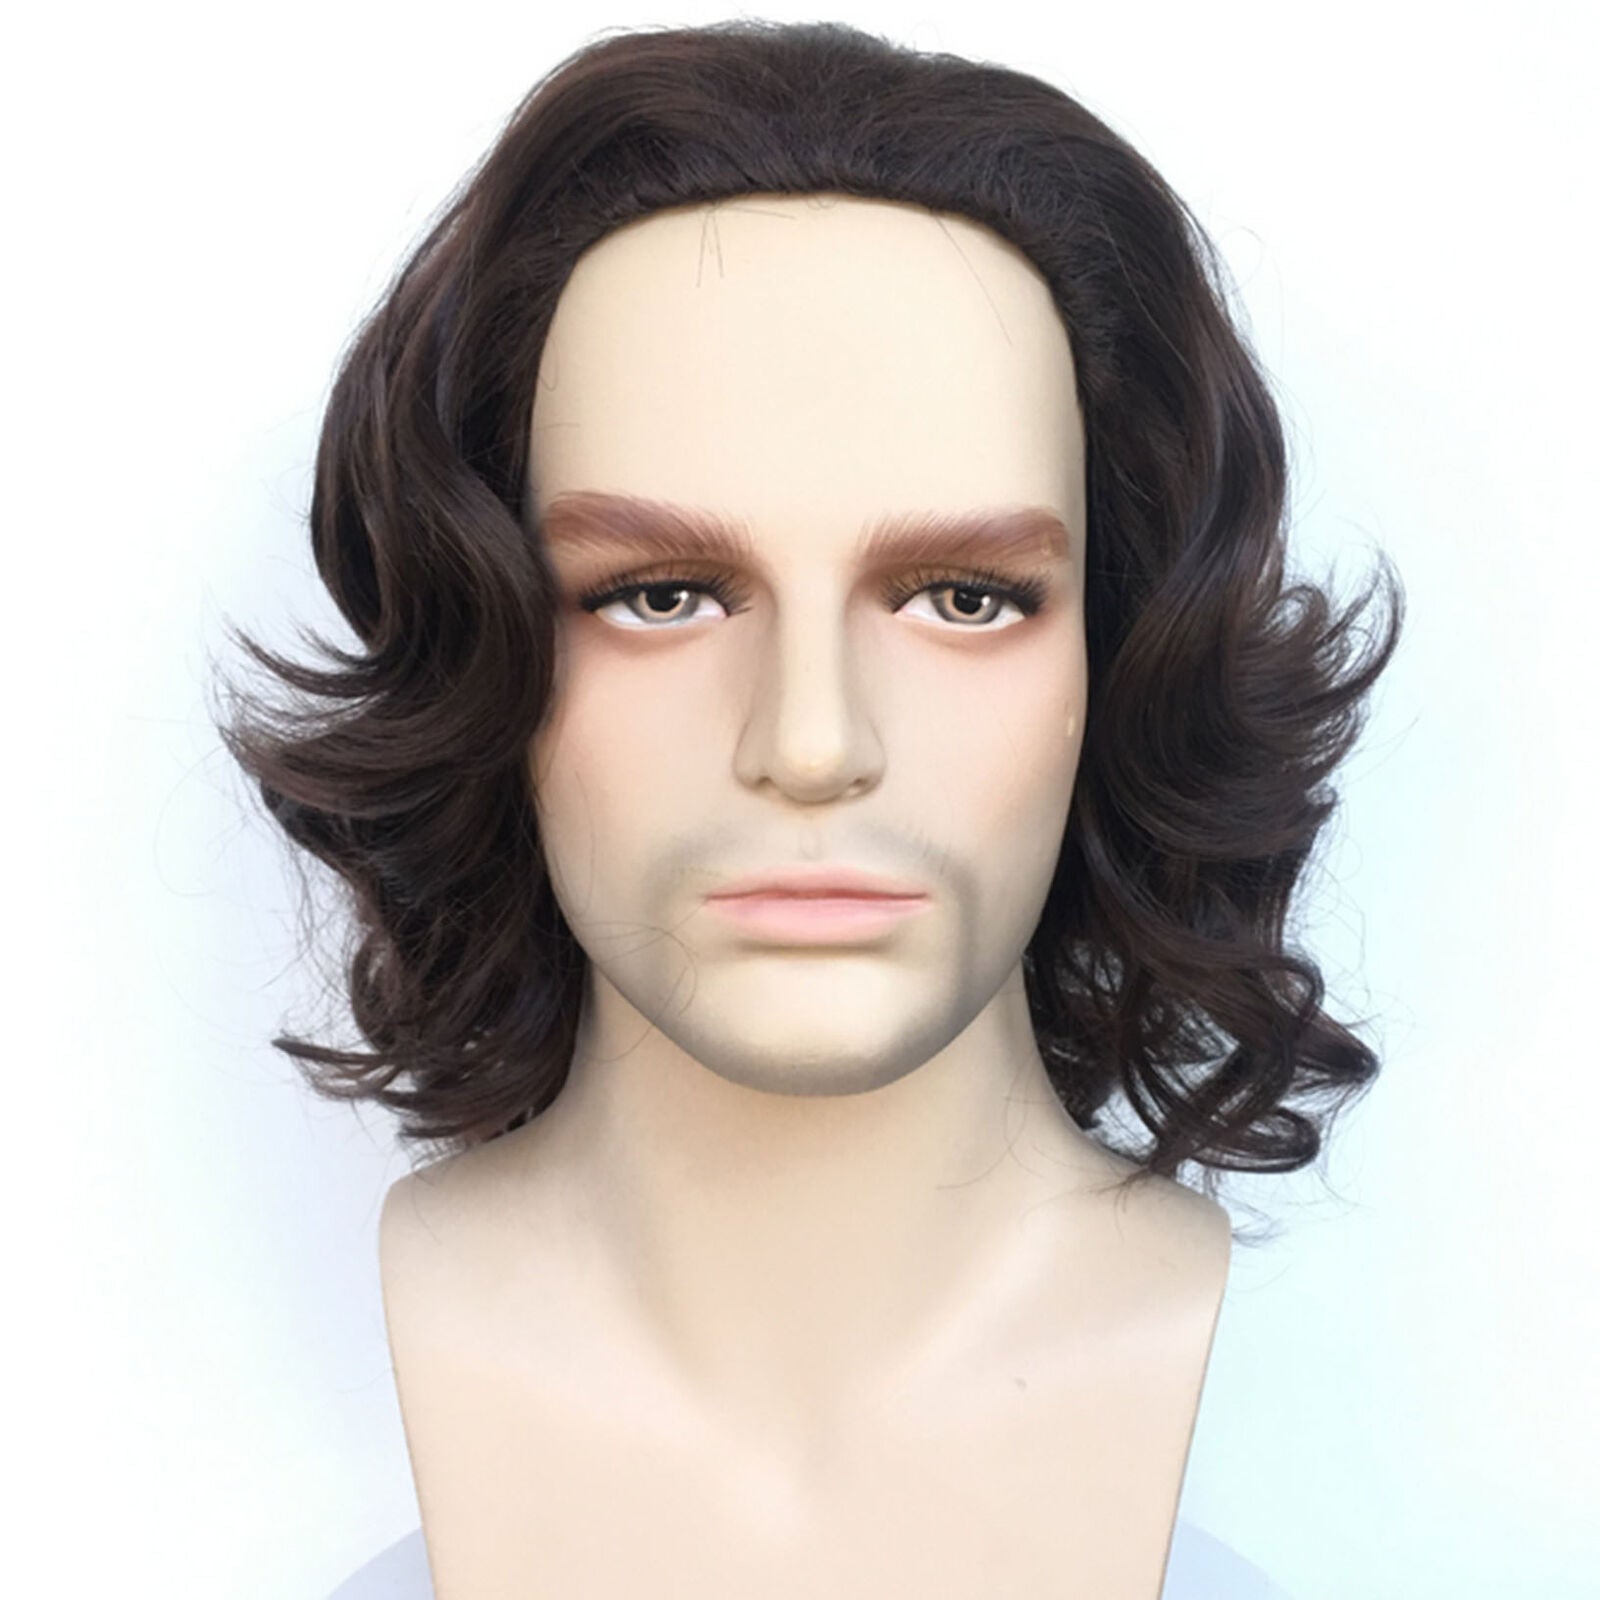 New Men Wigs Dark Brown Long Curly Waves for Man Heat Resistant Synthetic Hair